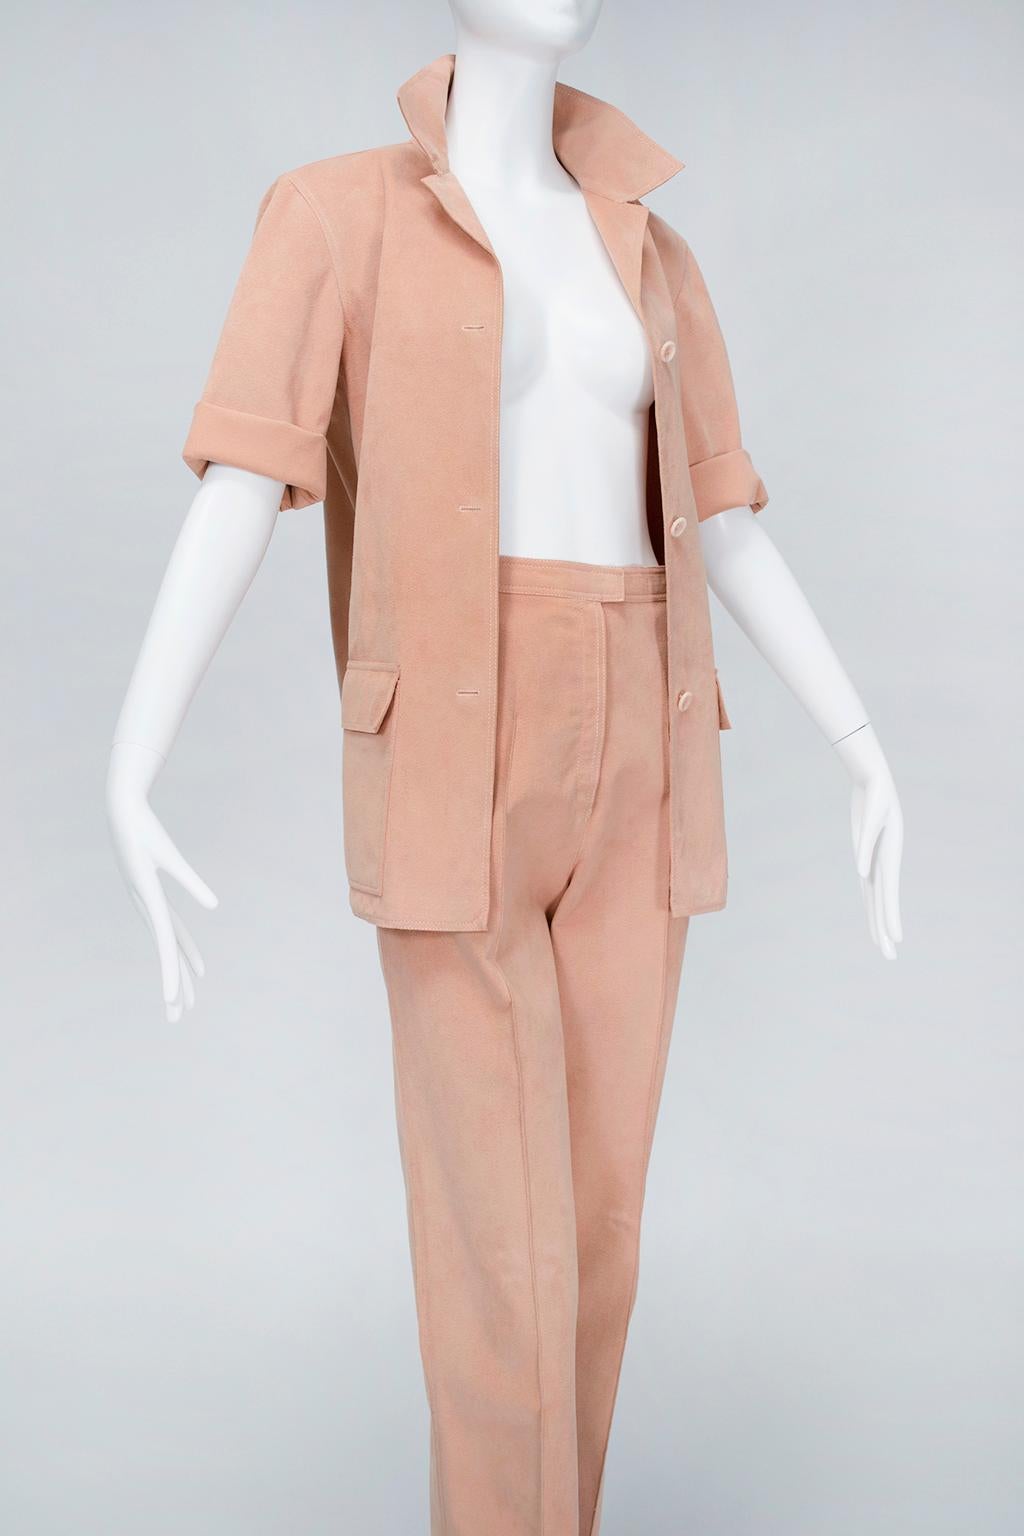 Halston Nude Washable Ultrasuede Belted Tunic and Pant Safari Set - M, 1970s In Good Condition For Sale In Tucson, AZ